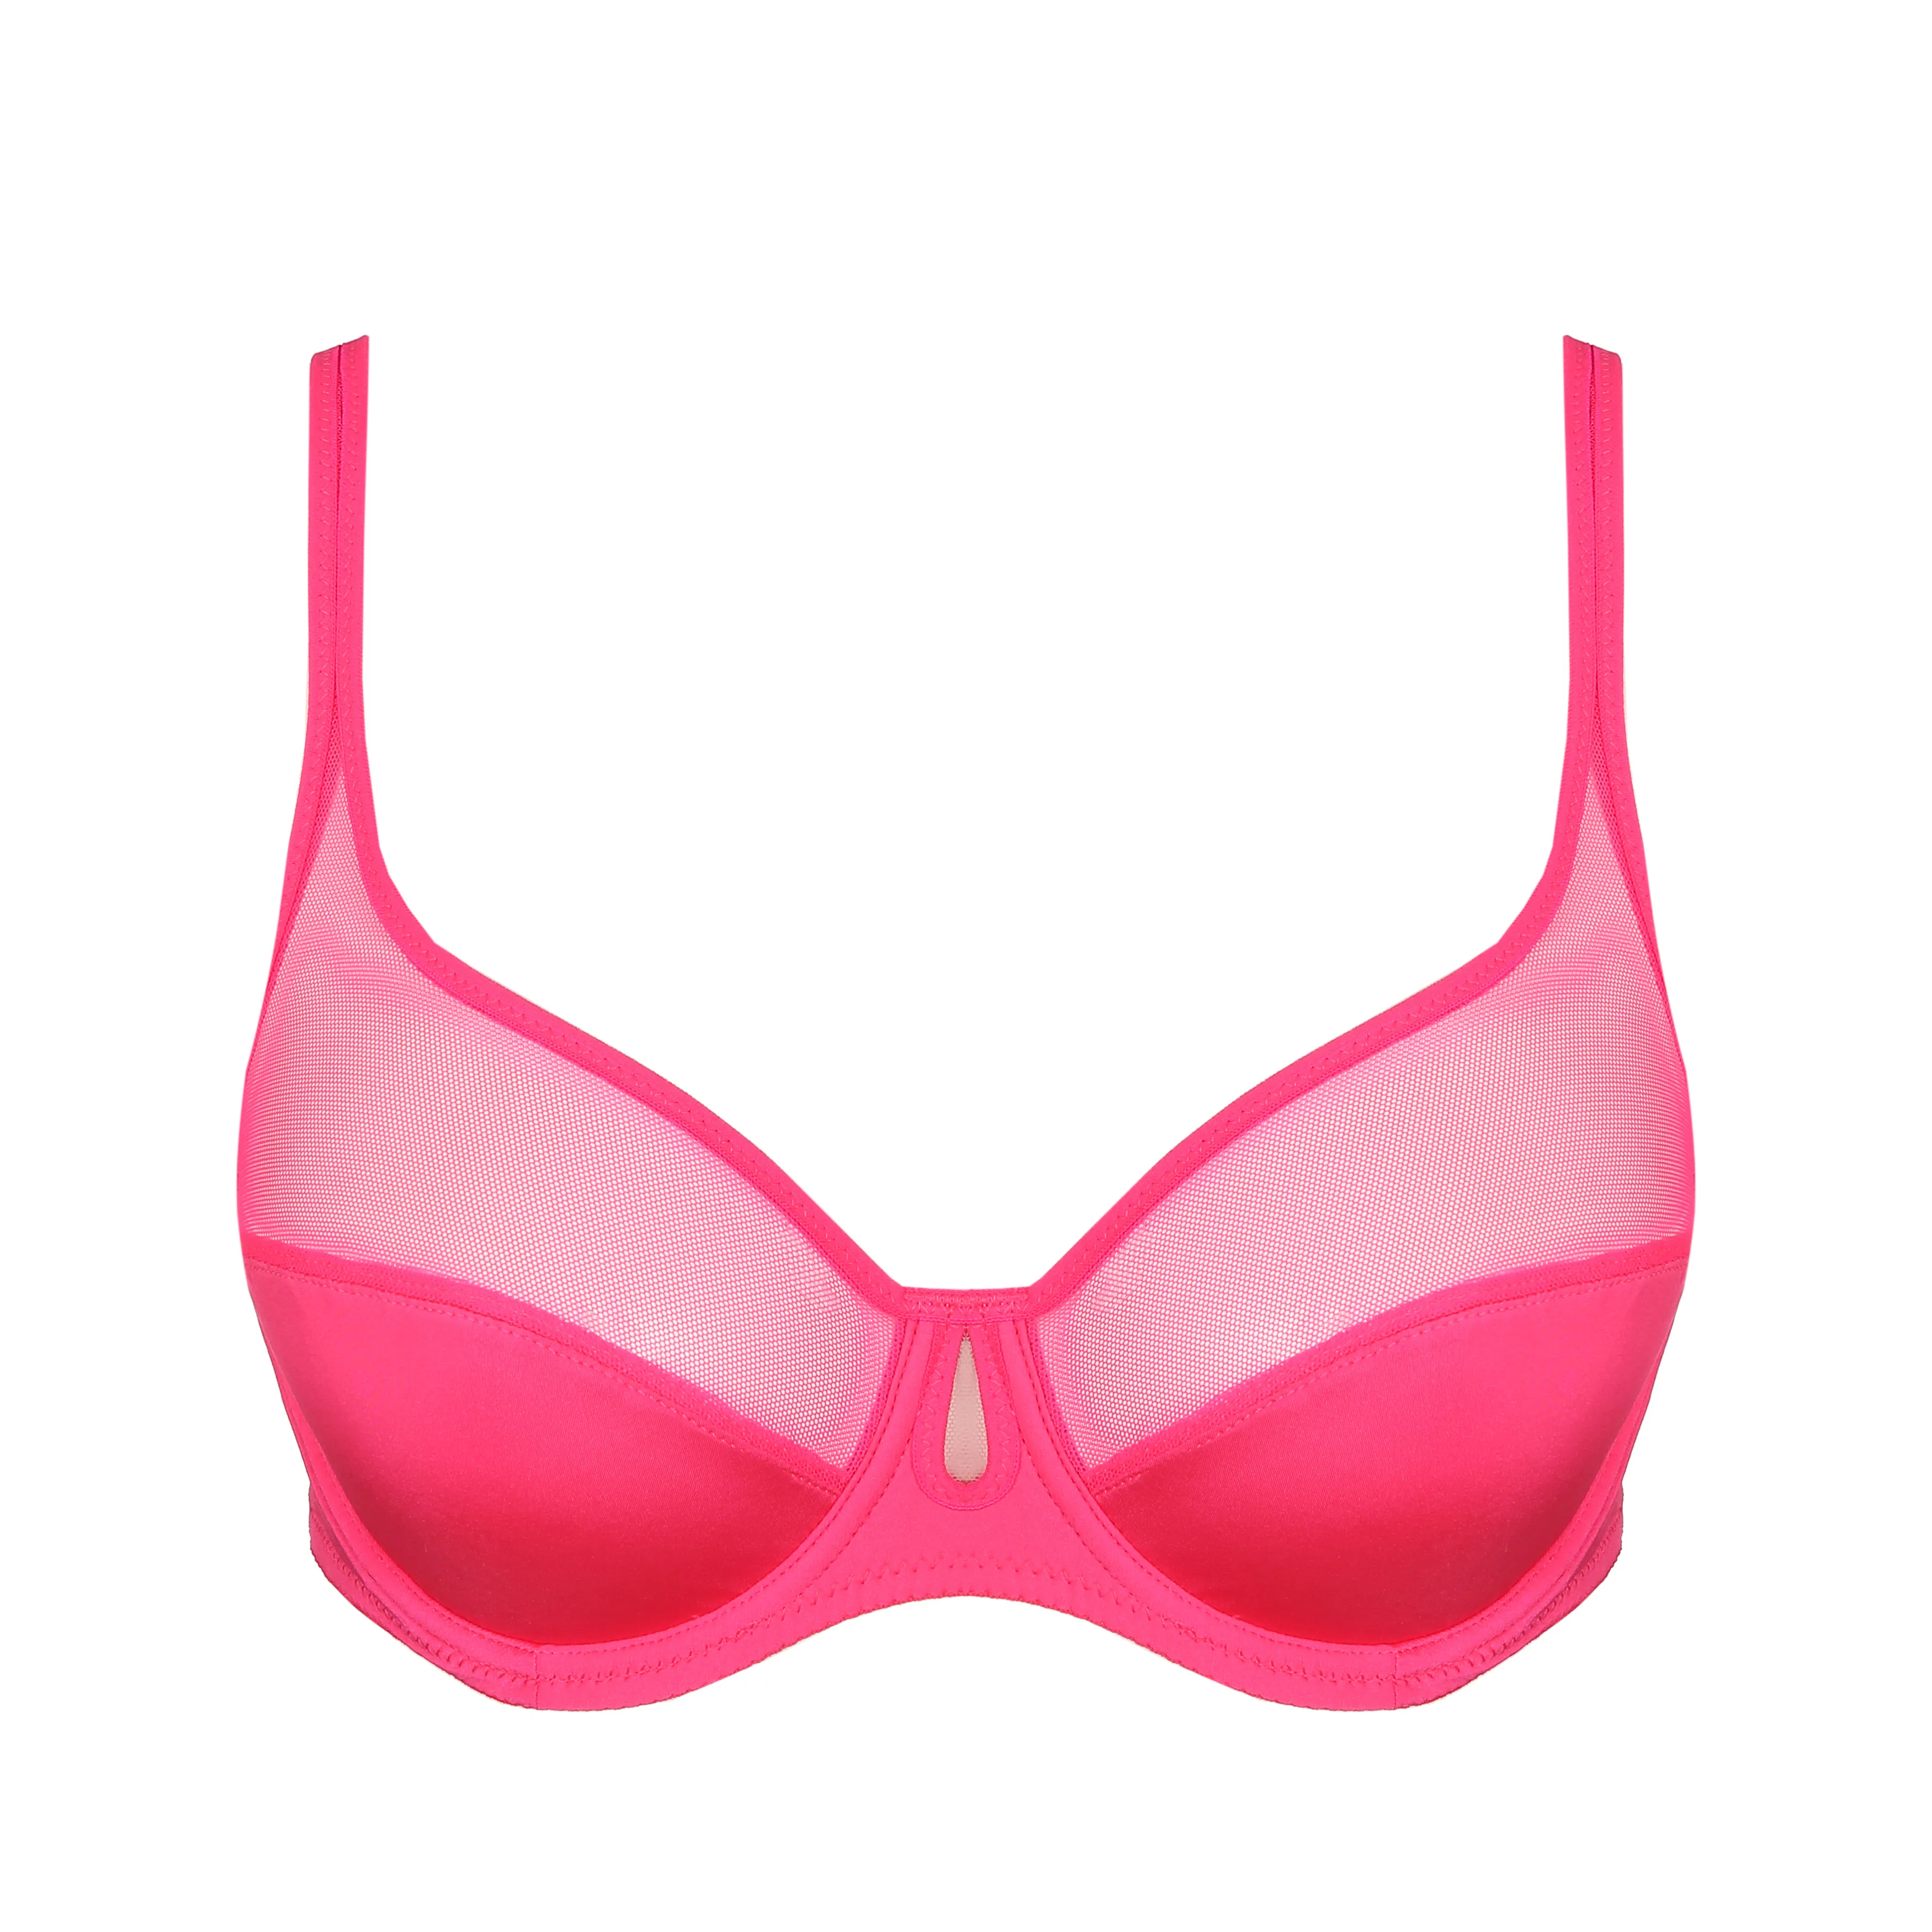 Cacique Bra 42F Lightly Lined Full Coverage Hot Pink Orange Barbie Underwire